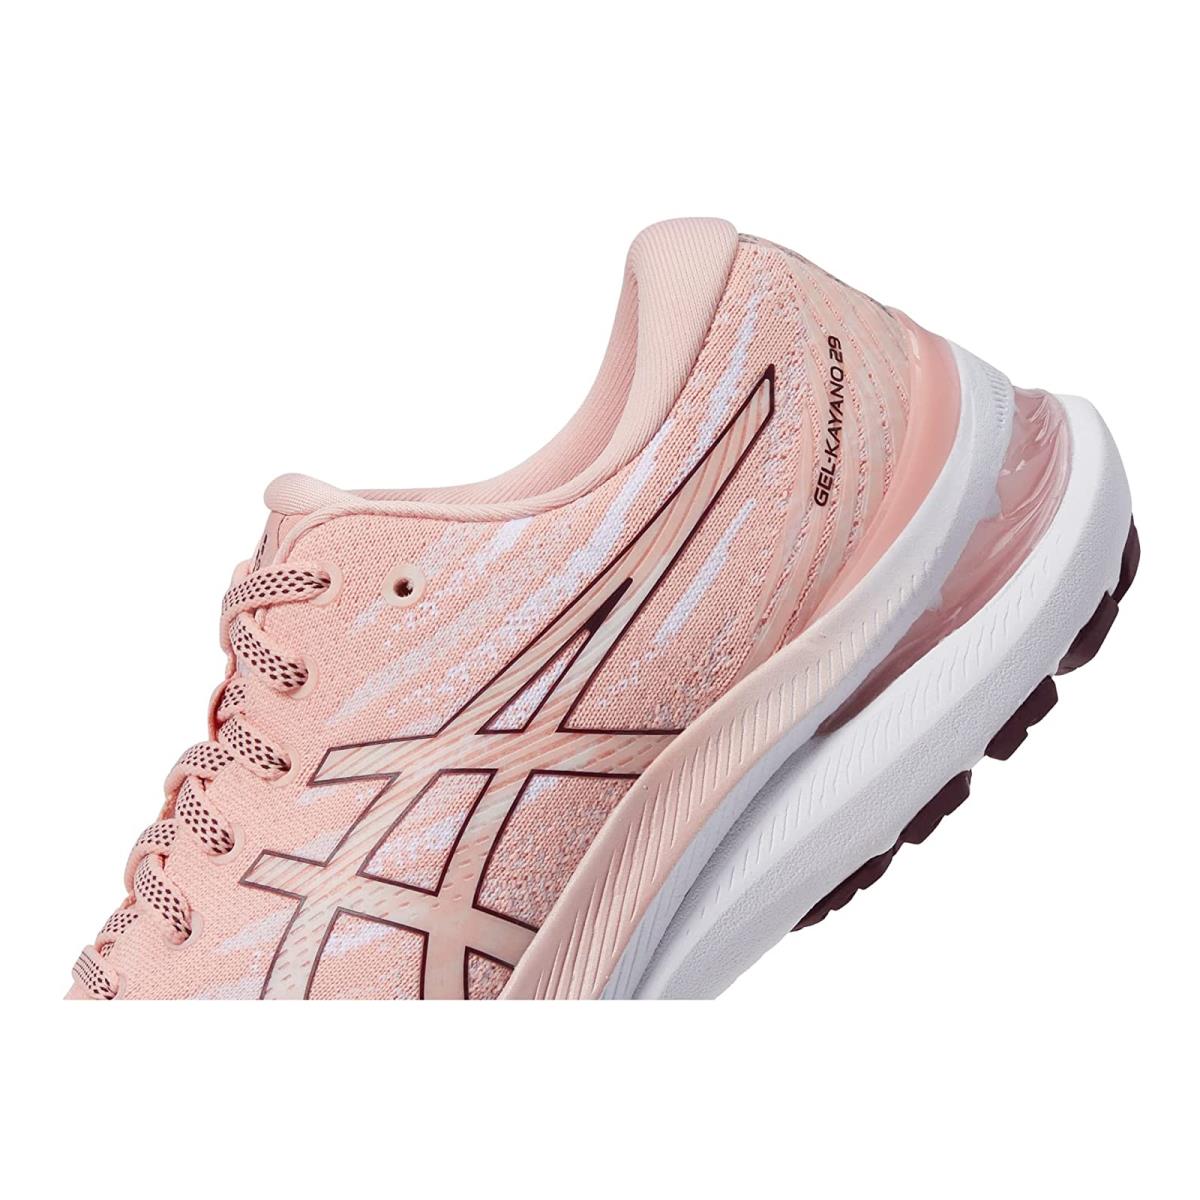 ASICS shoes  - Frosted Rose/Deep Mars 3